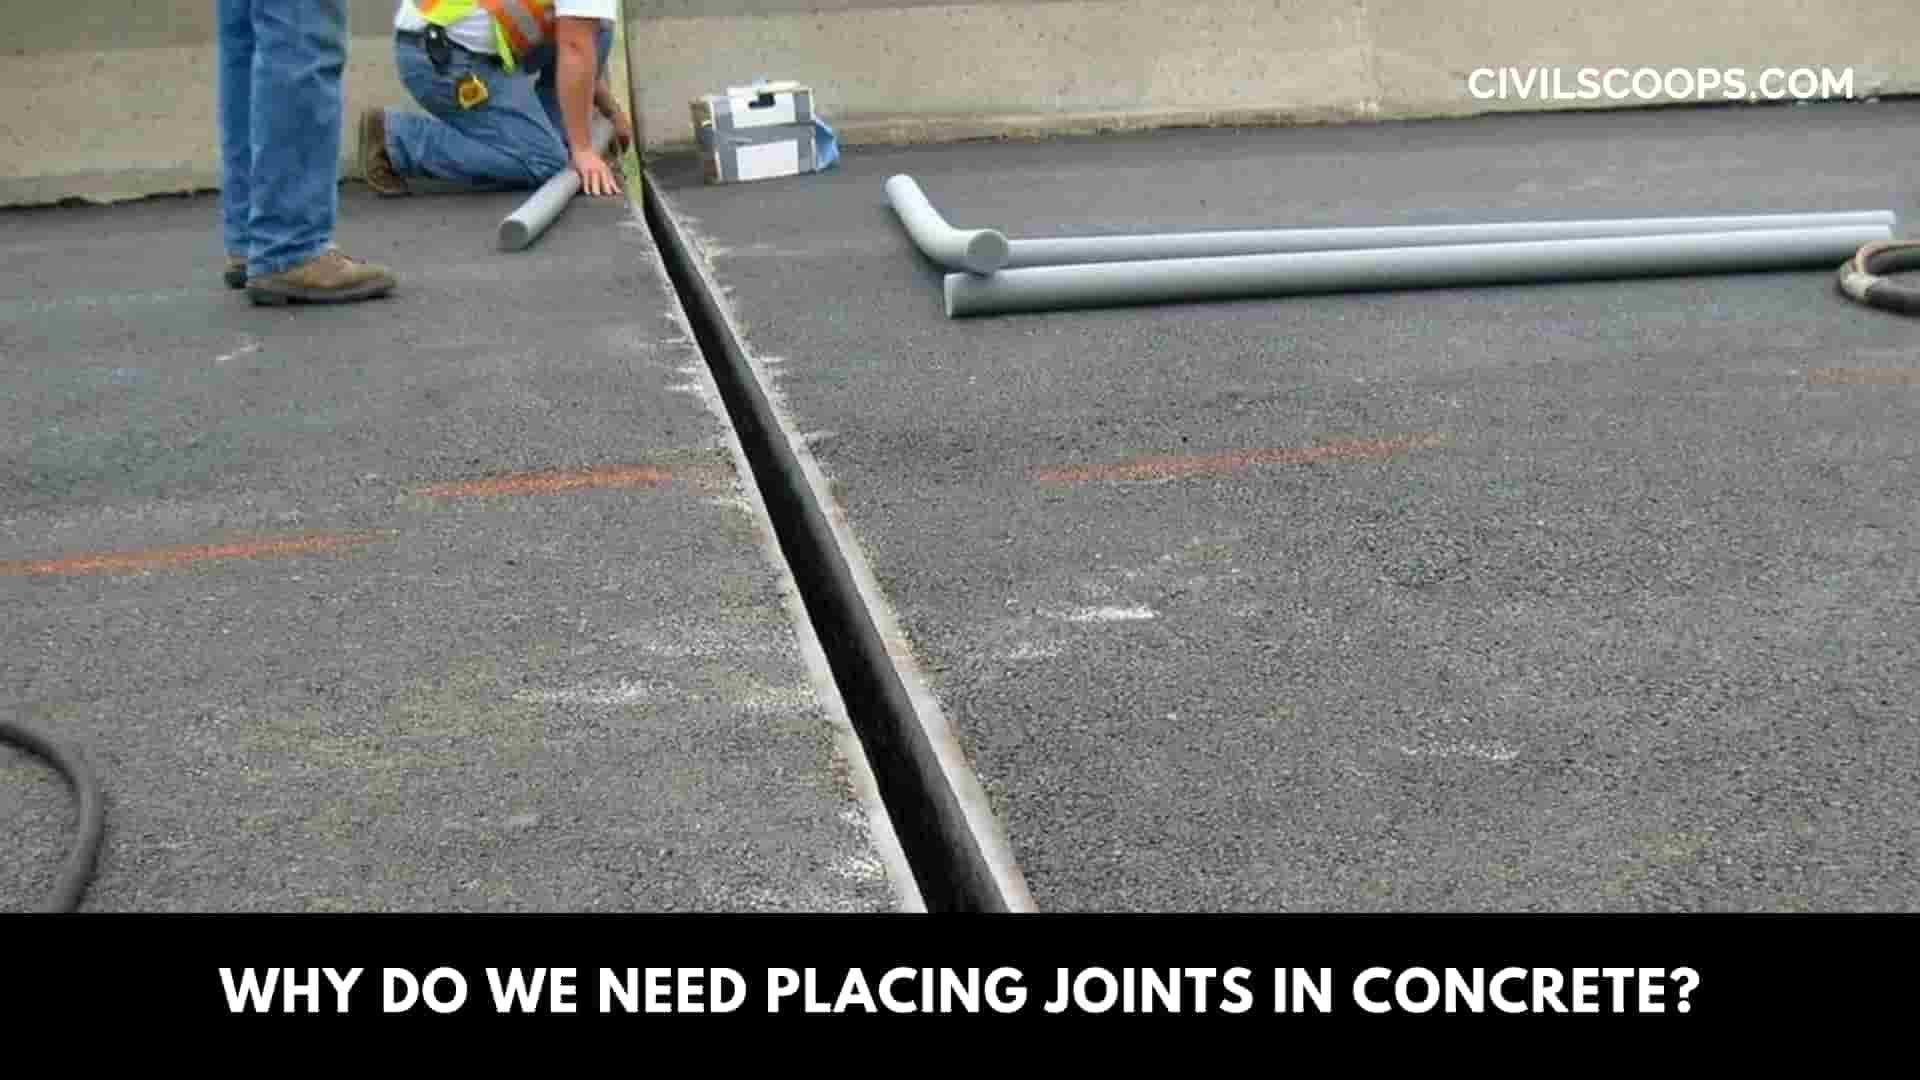 Why Do We Need Placing Joints in Concrete?